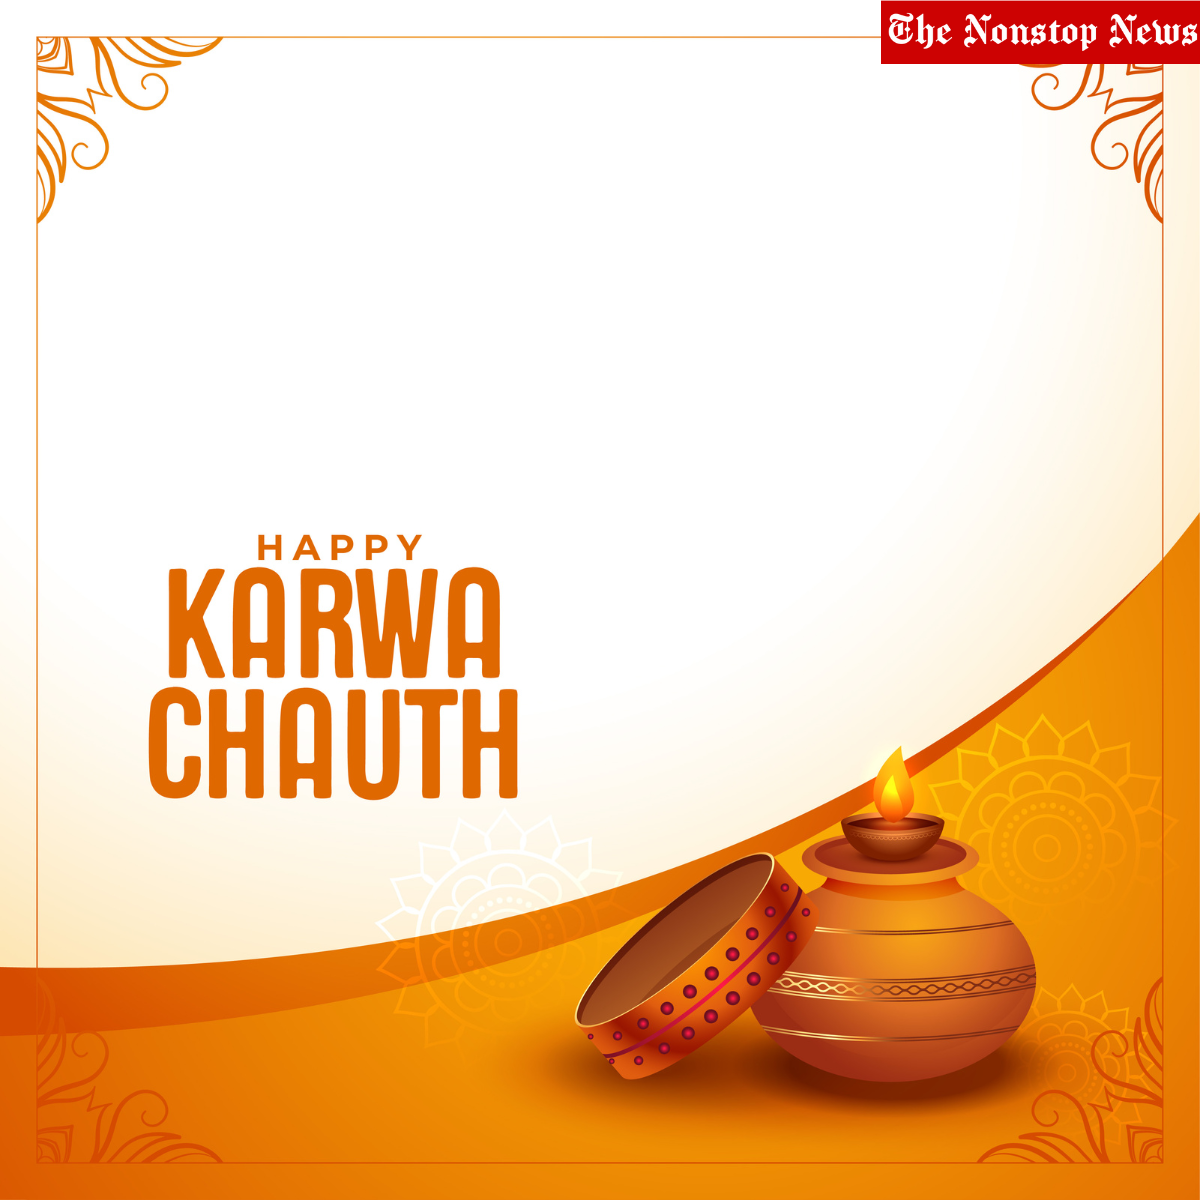 Karwa Chauth Wishes in Quotes For Greet Husband/Wife 2022: Wishes, Greetings, Posters, Messages, Banners, HD Images, and Shayari